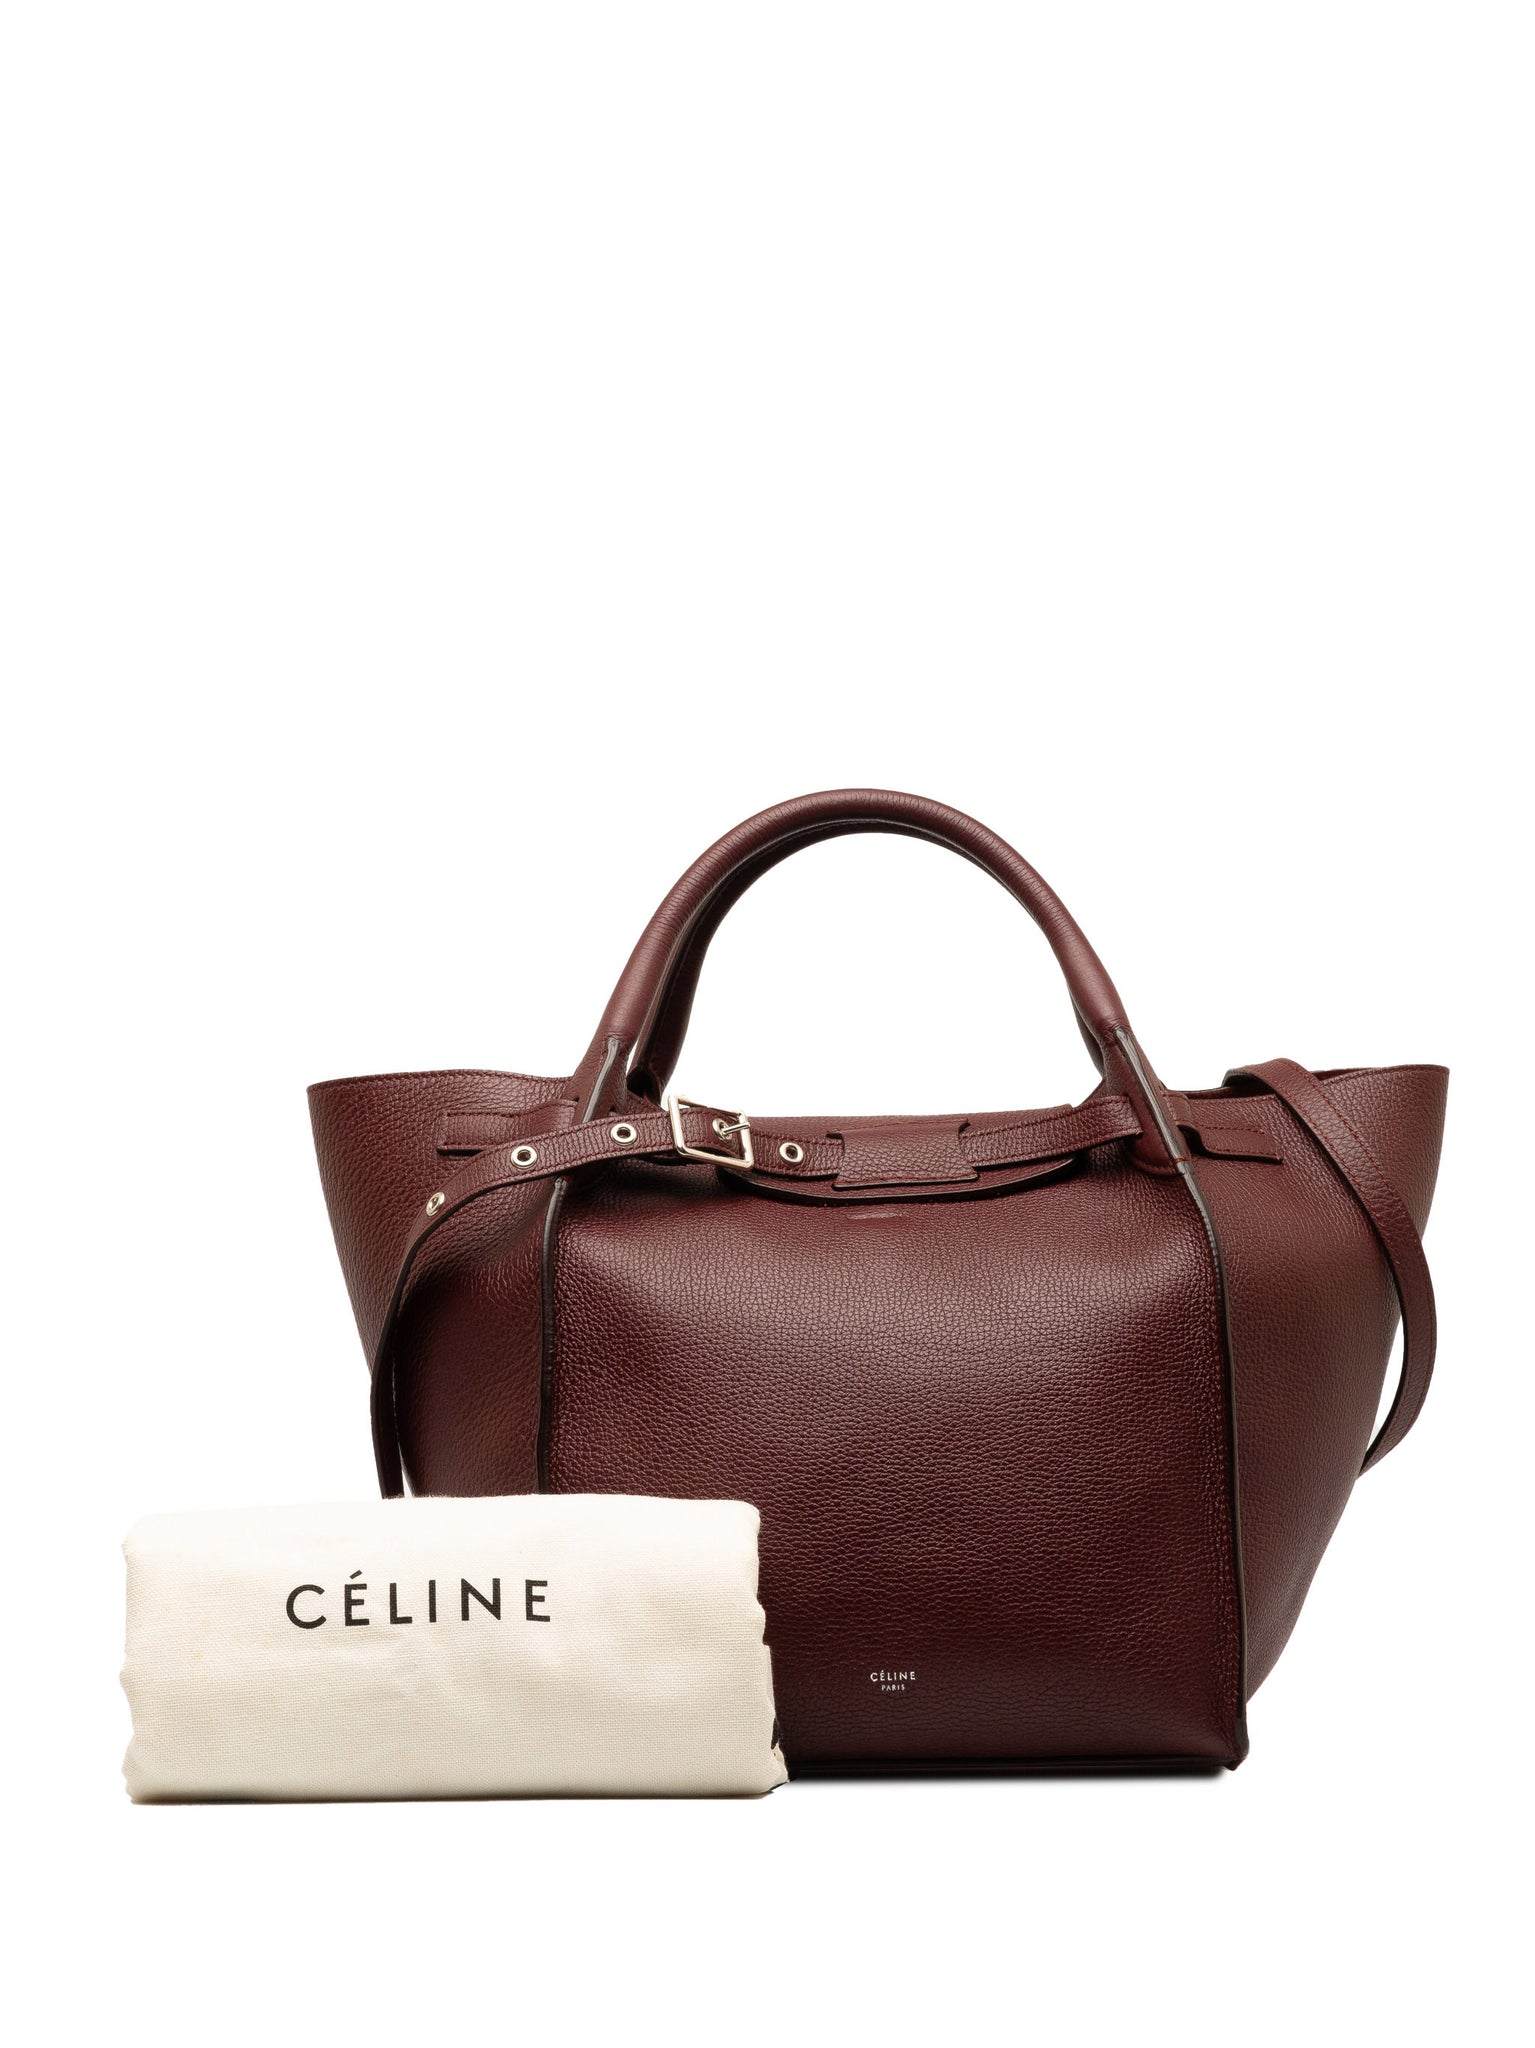 Celine Big Bag Small Red Leather